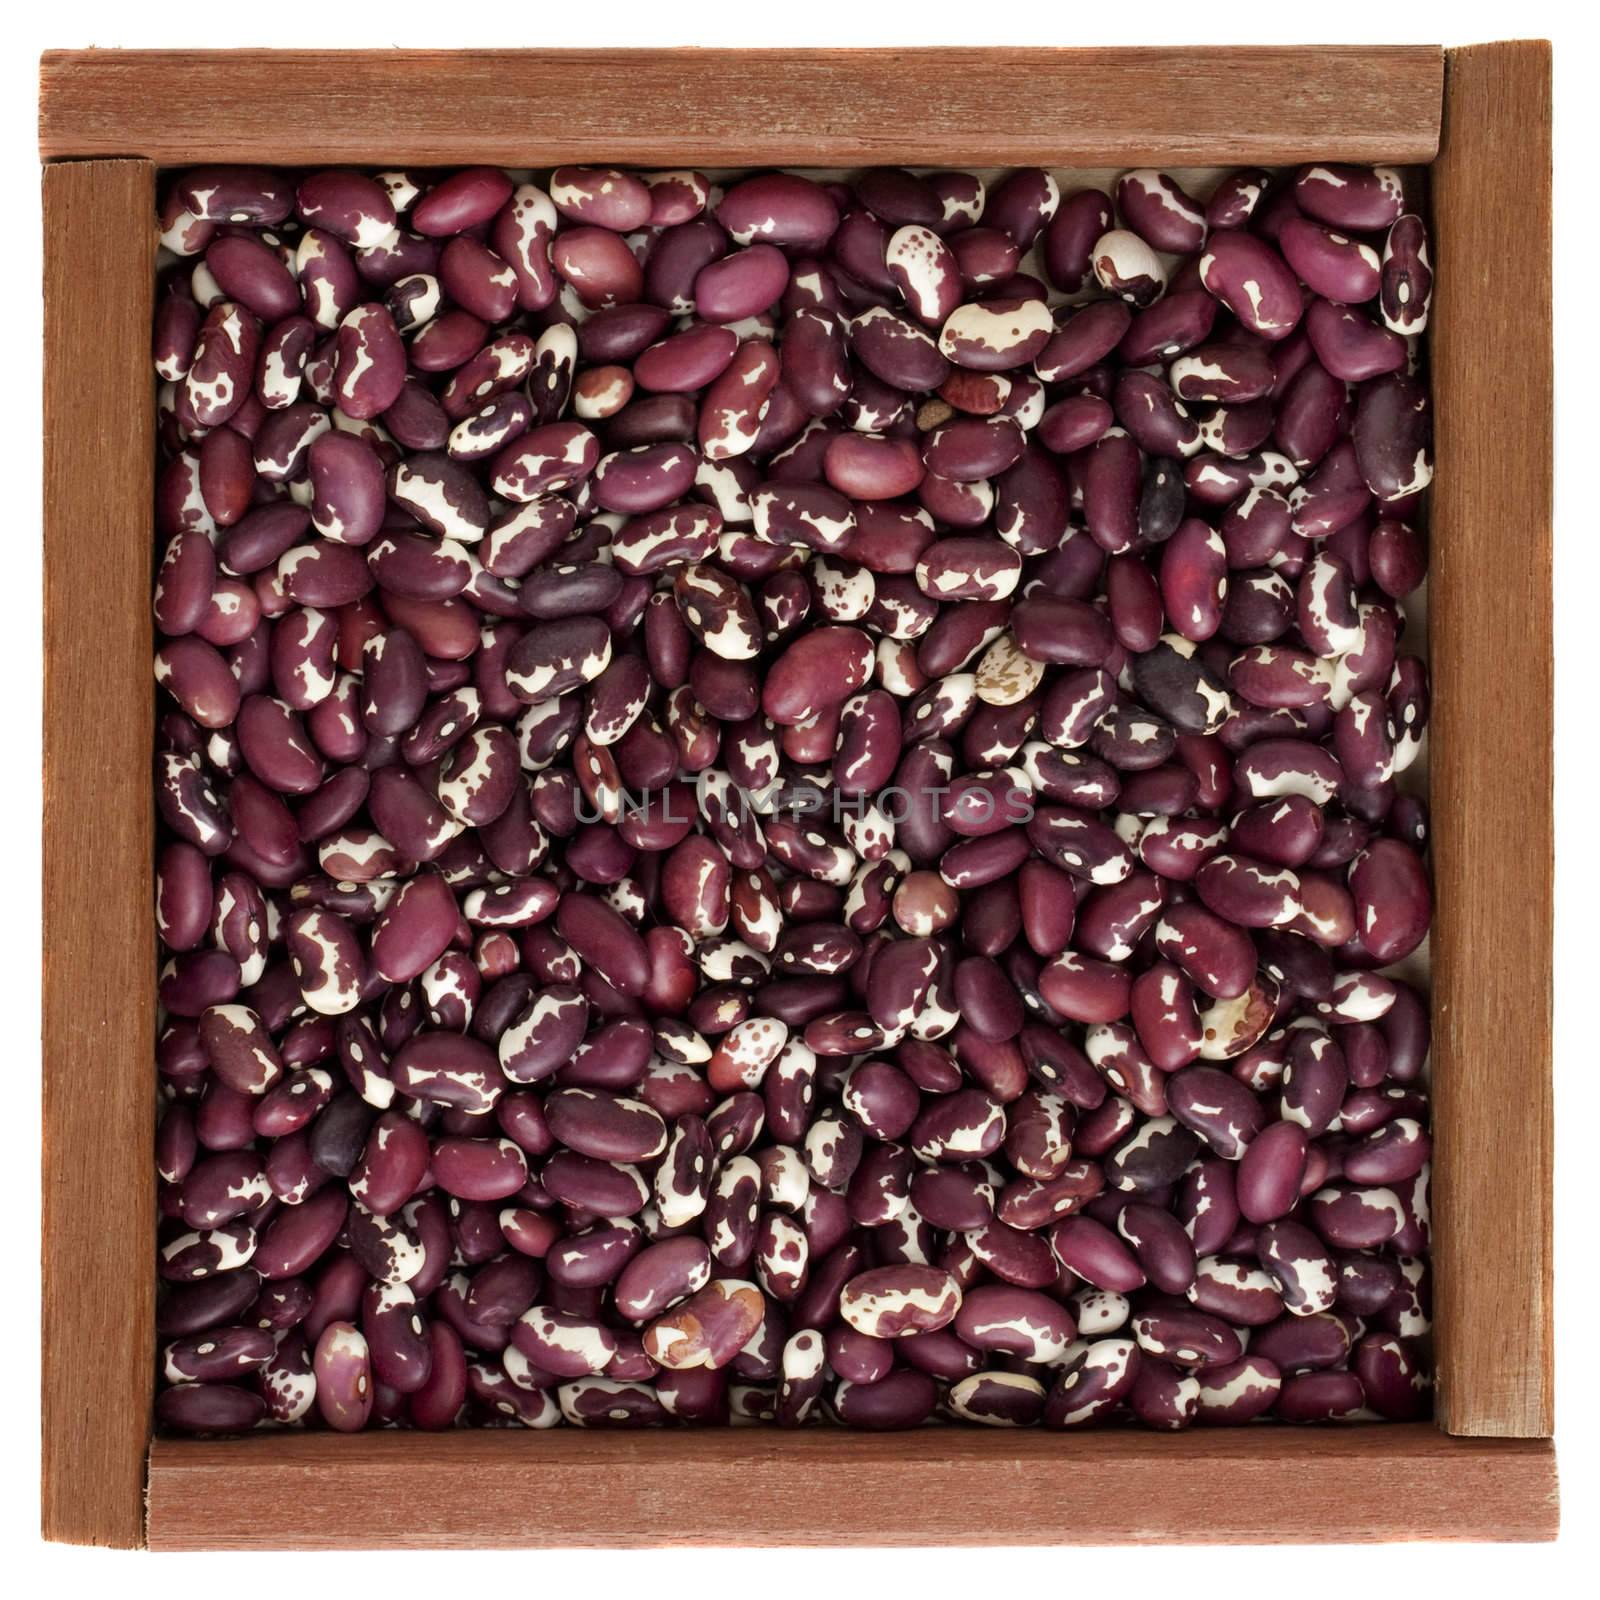 purple and white Anasazi beans in a wooden box by PixelsAway